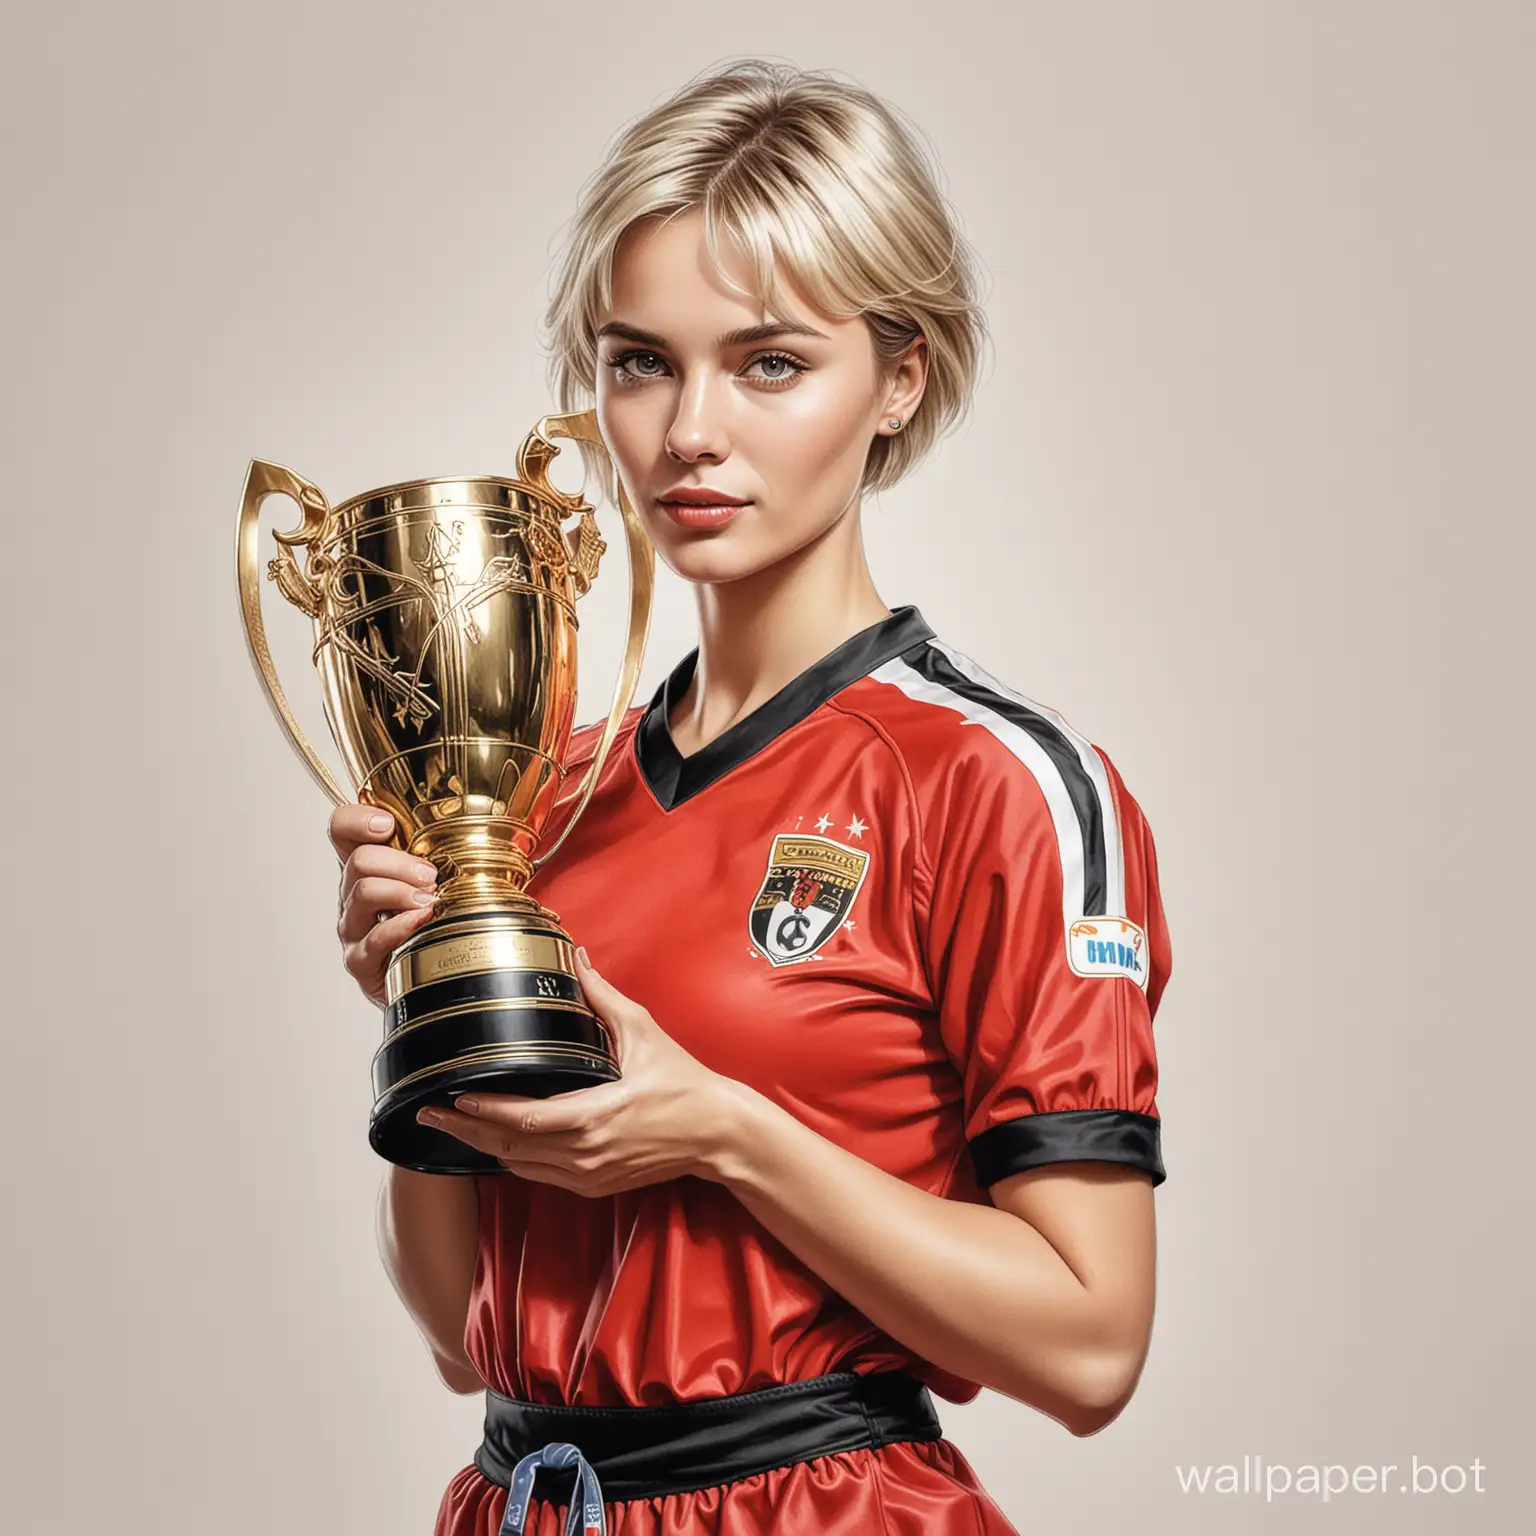 Realistic-Drawing-of-Young-Irina-Chashchina-in-Red-and-Black-Football-Uniform-Holding-Champions-Cup